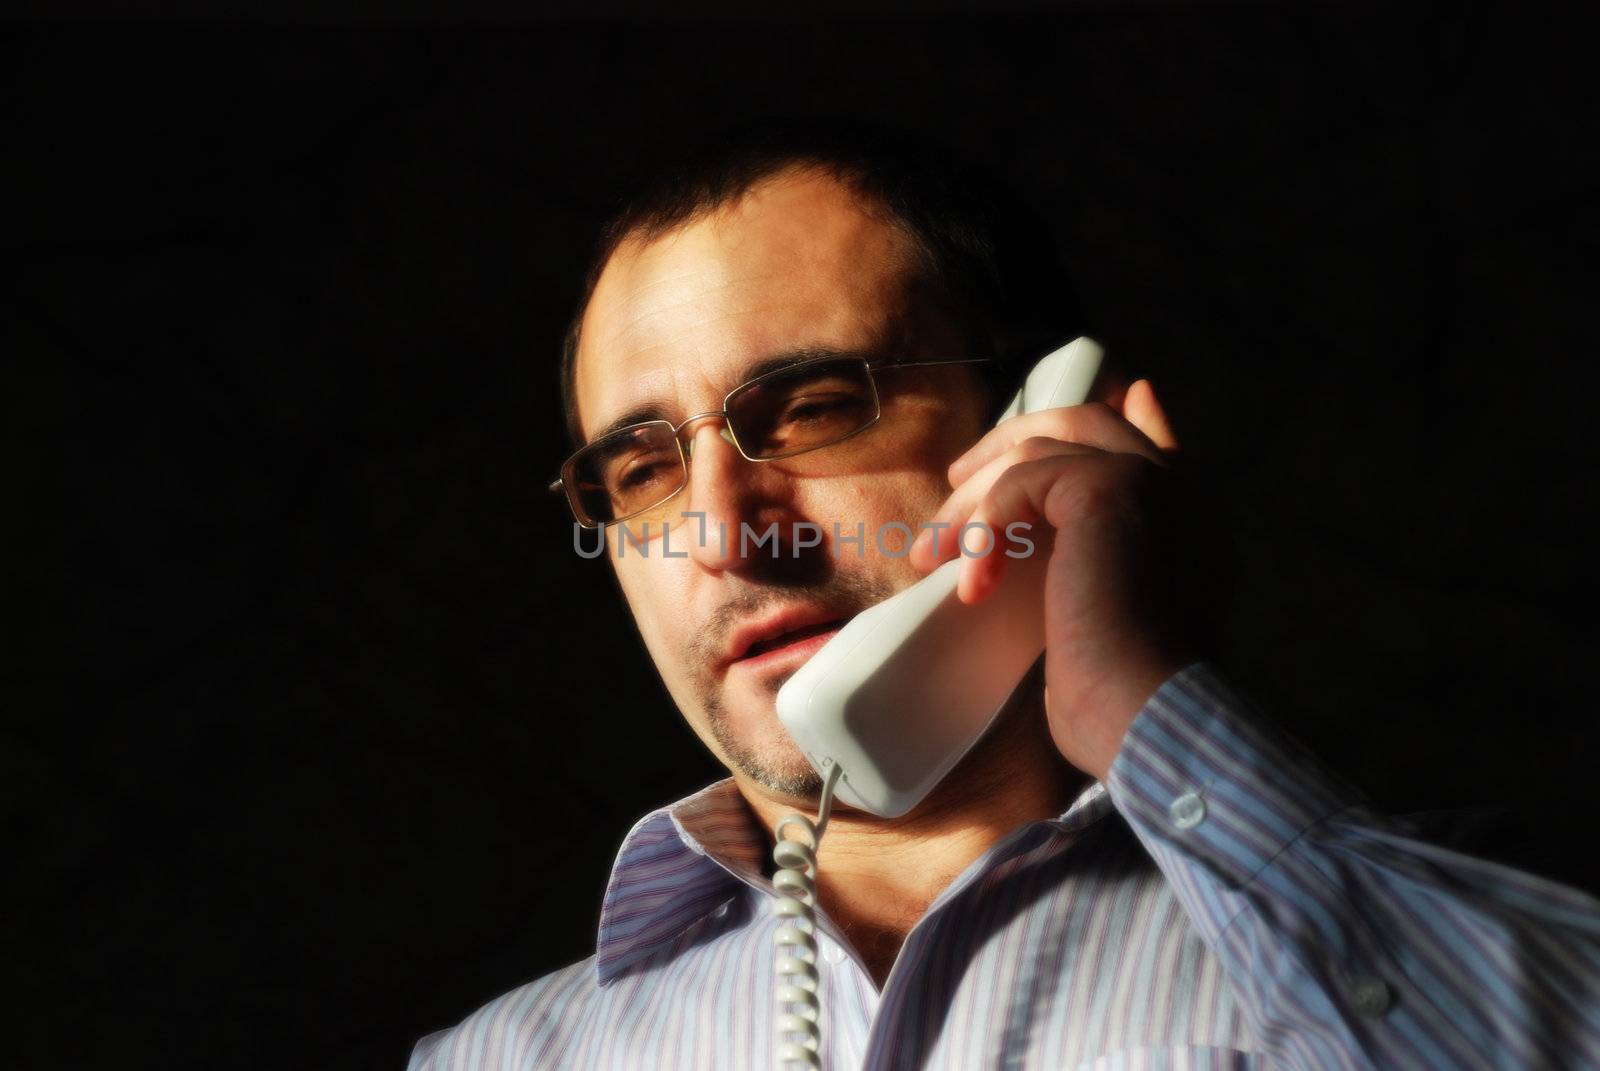 The businessman in a white shirt with stripes speaks by phone